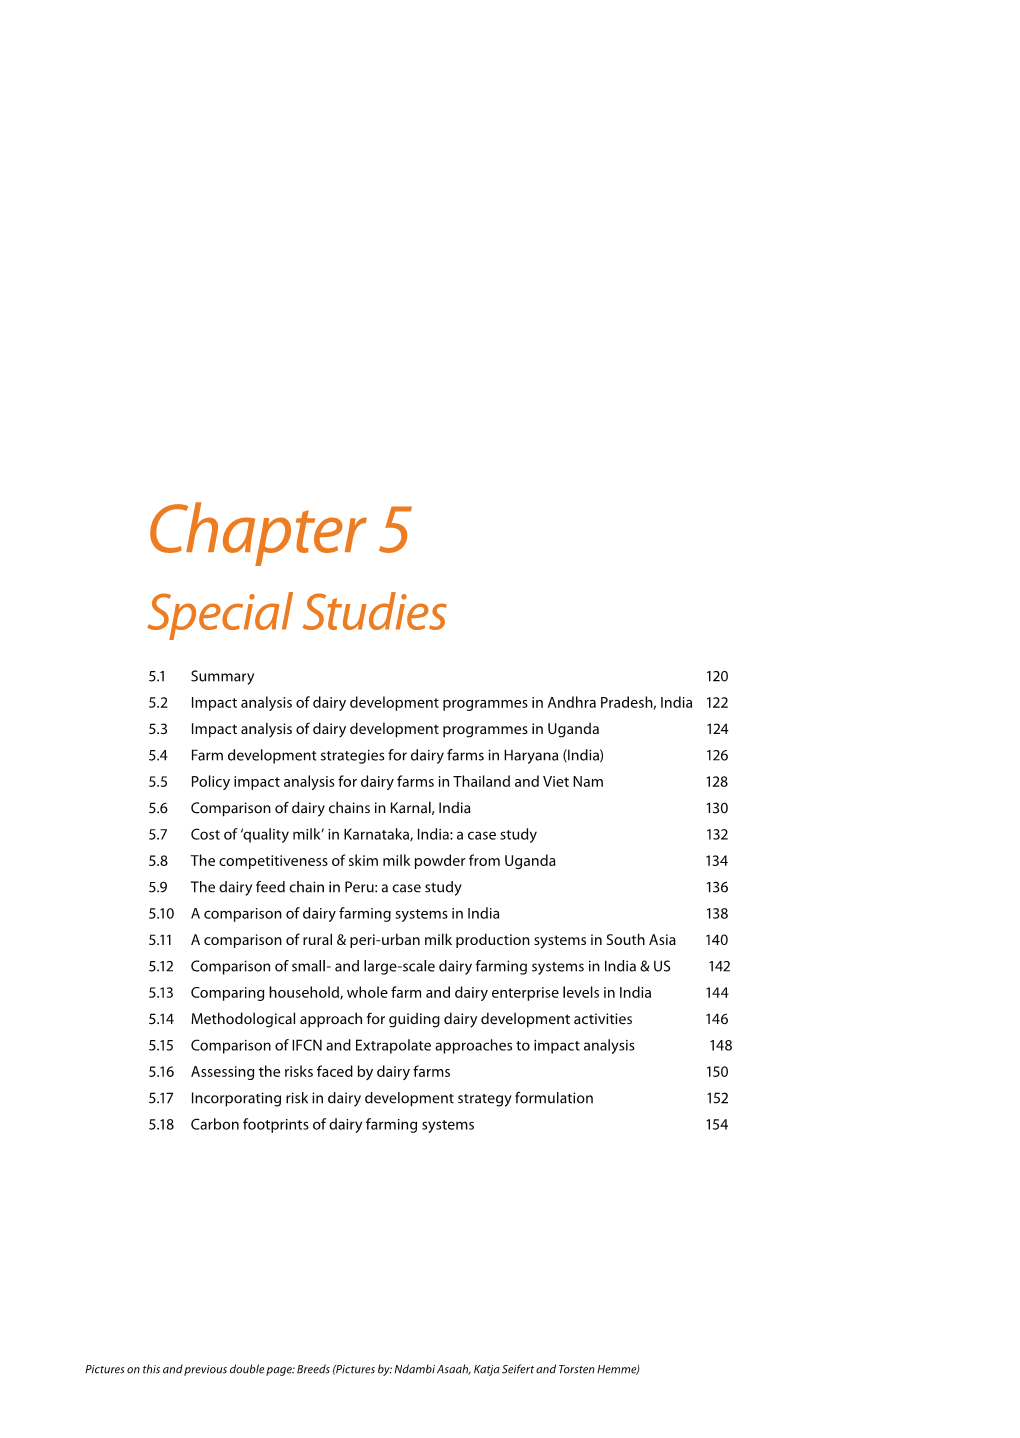 Chapter 5 Special Studies